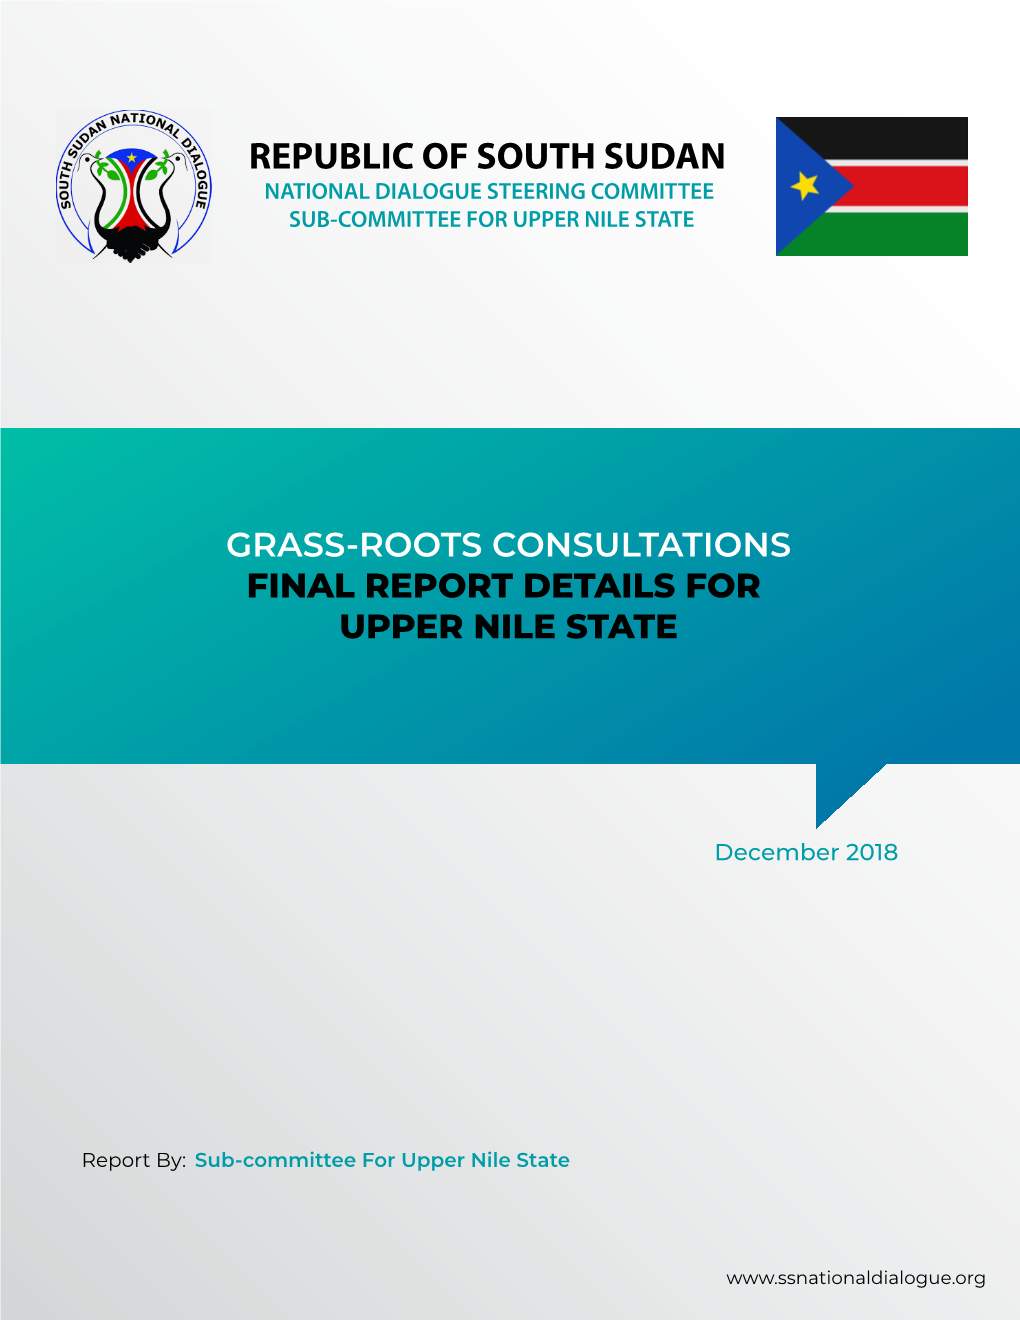 Republic of South Sudan National Dialogue Steering Committee Sub-Committee for Upper Nile State